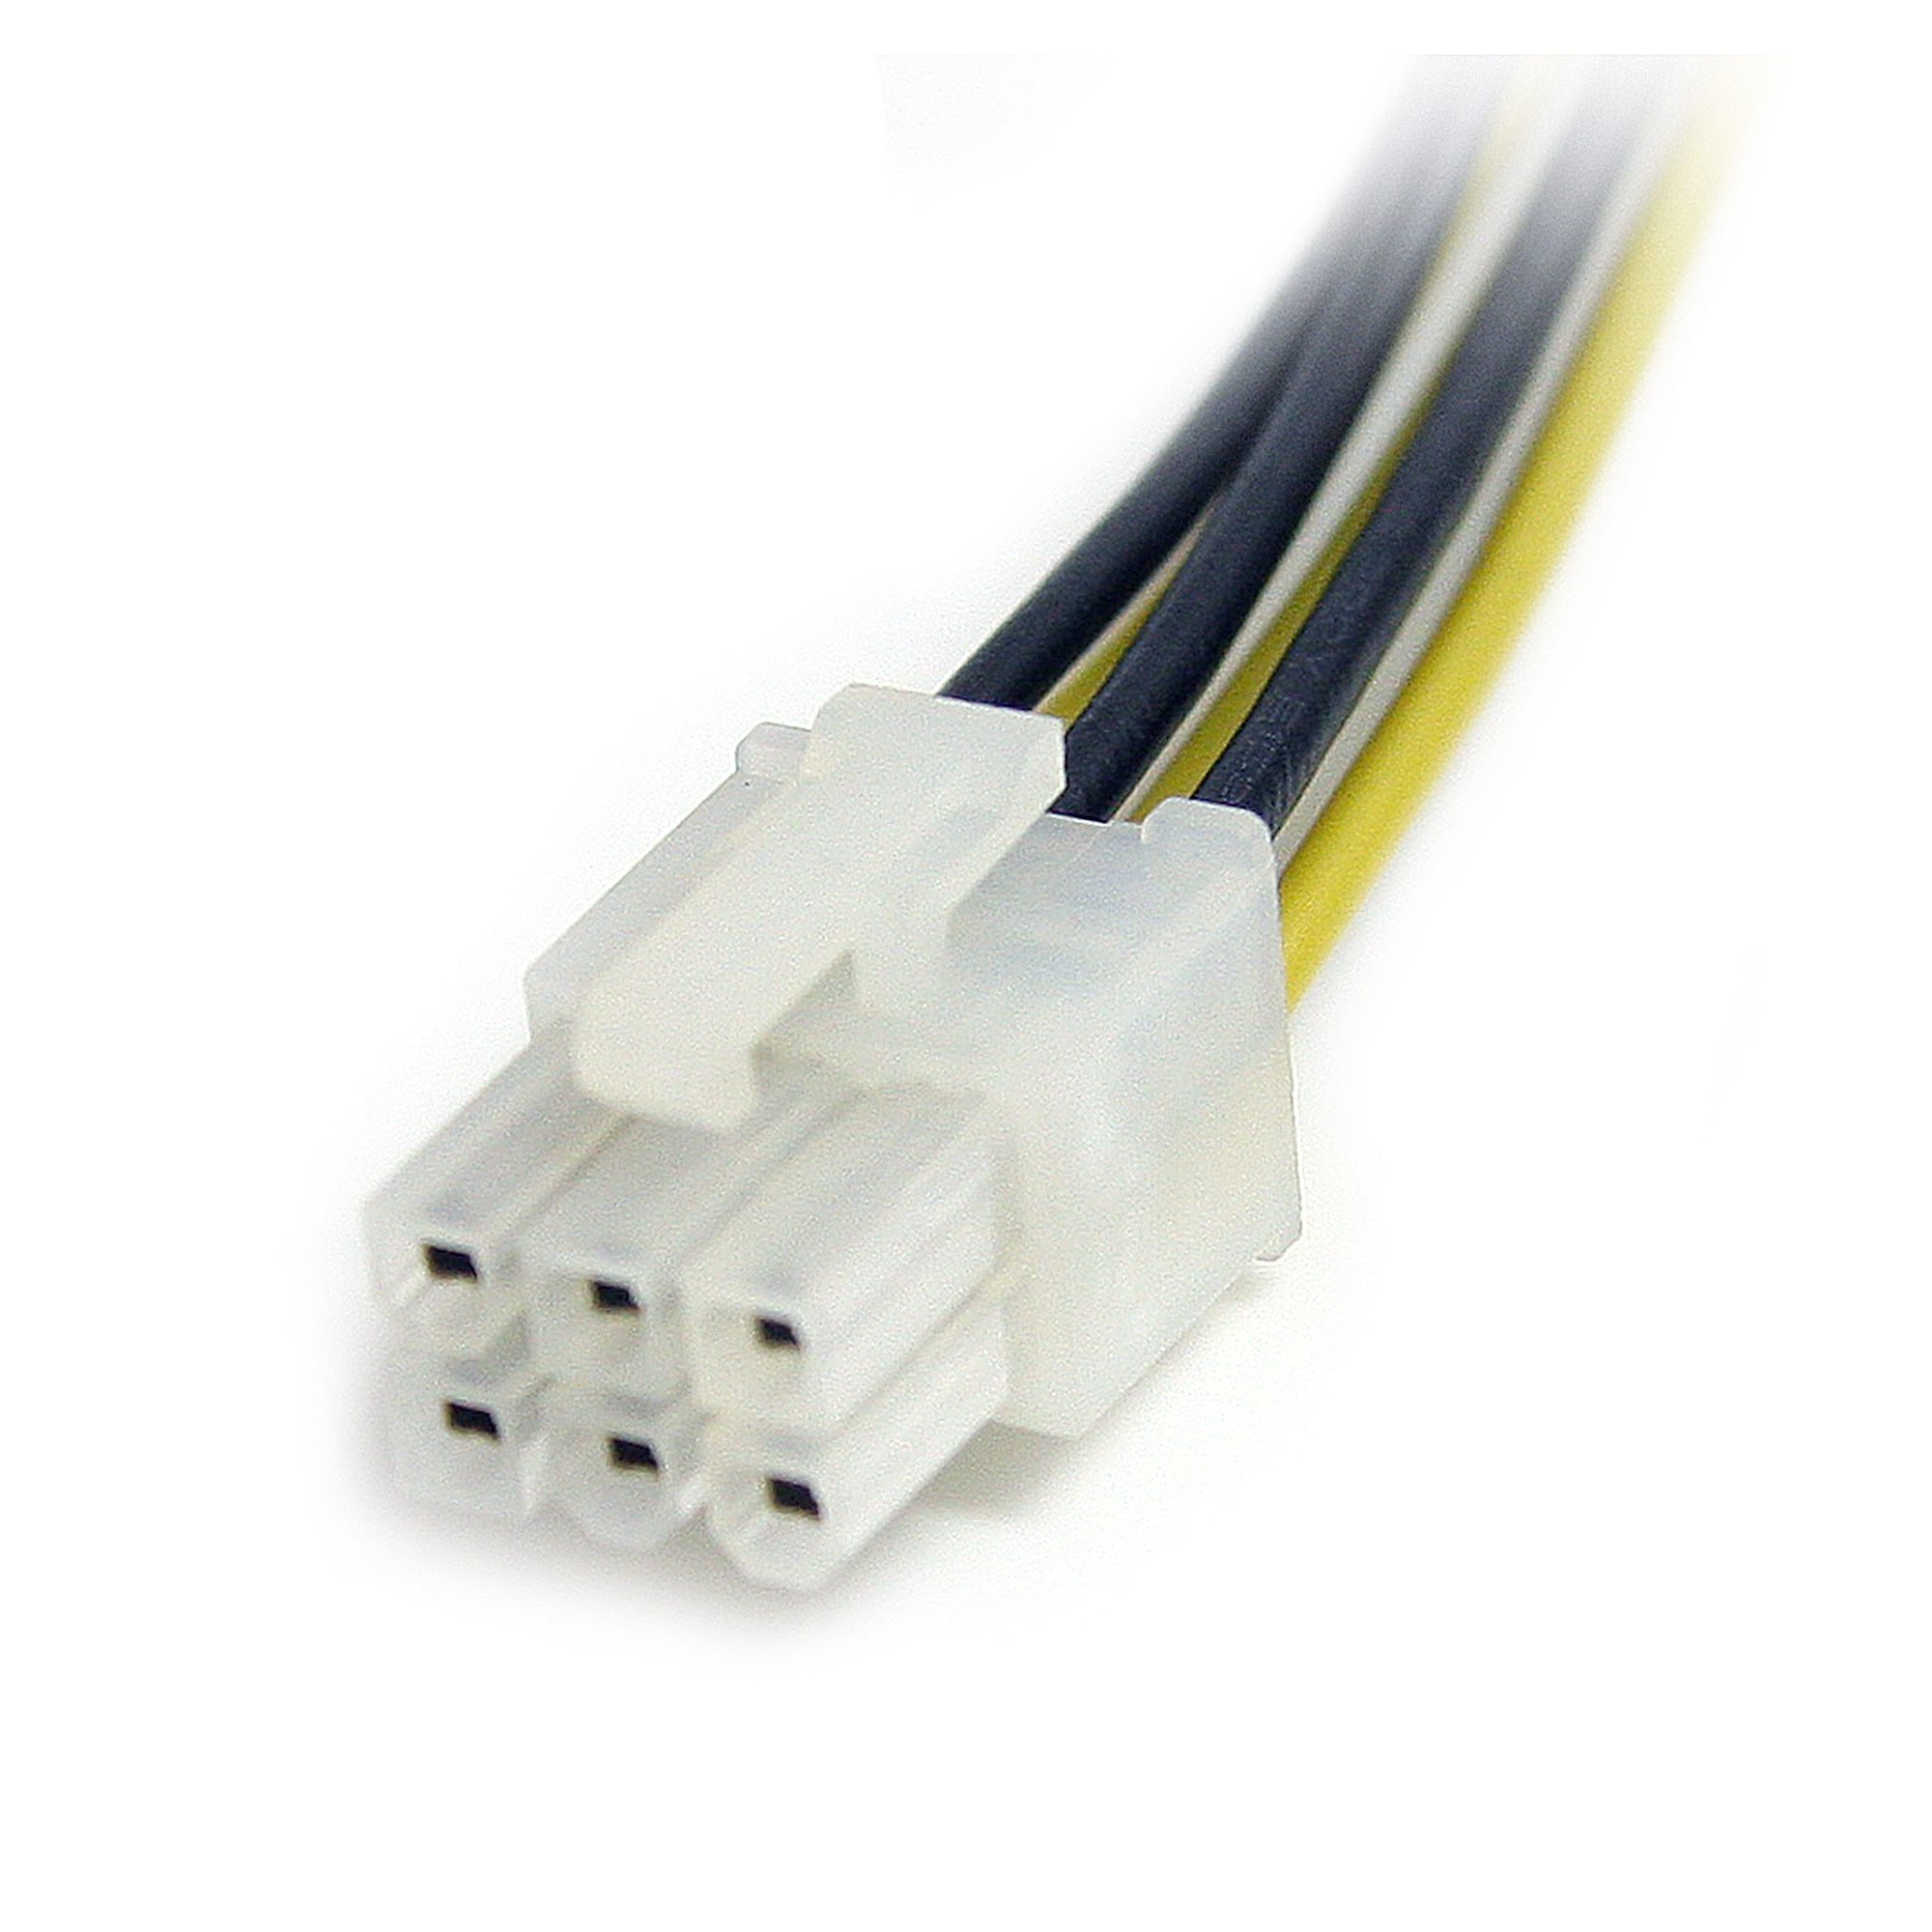 PCIEXSPLIT6 6 pin PCIe power to 6 pin PCIe power M - 5.9 in F yellow StarTech.com 6in PCI Express Power Splitter Cable Power splitter 